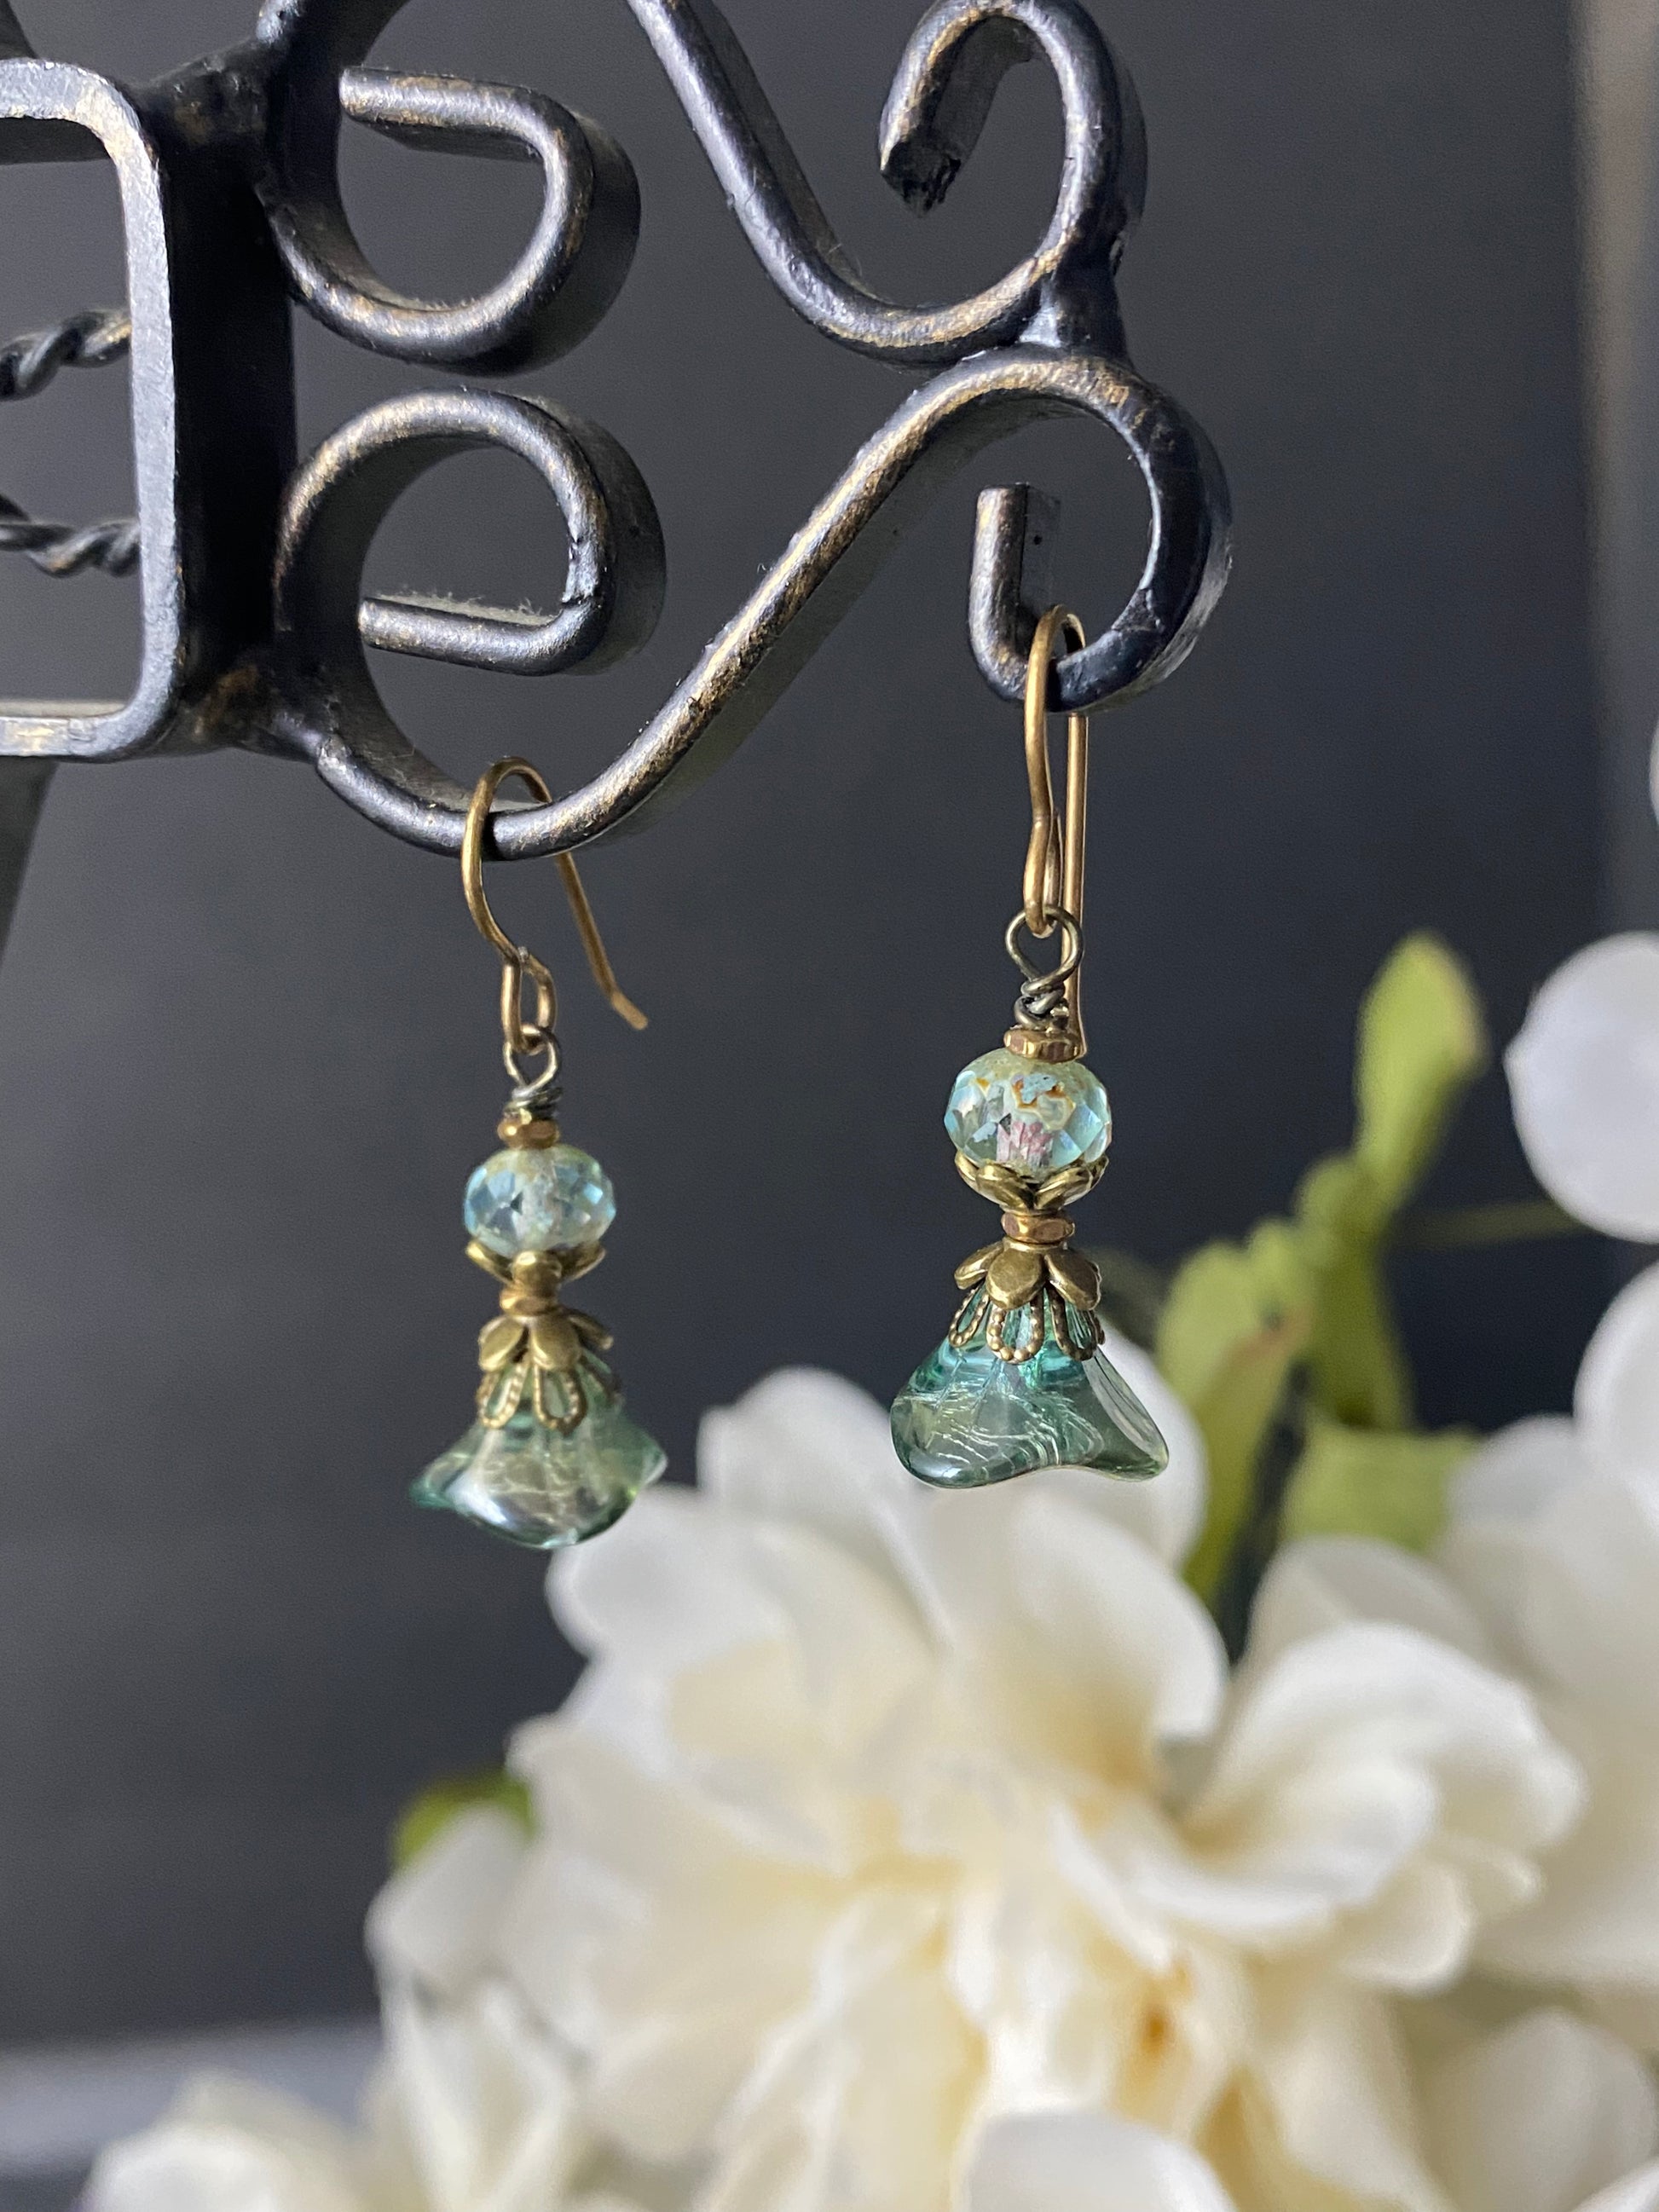 Teal Flower Czech glass, small earrings, and copper metal earrings. - Andria Bieber Designs 